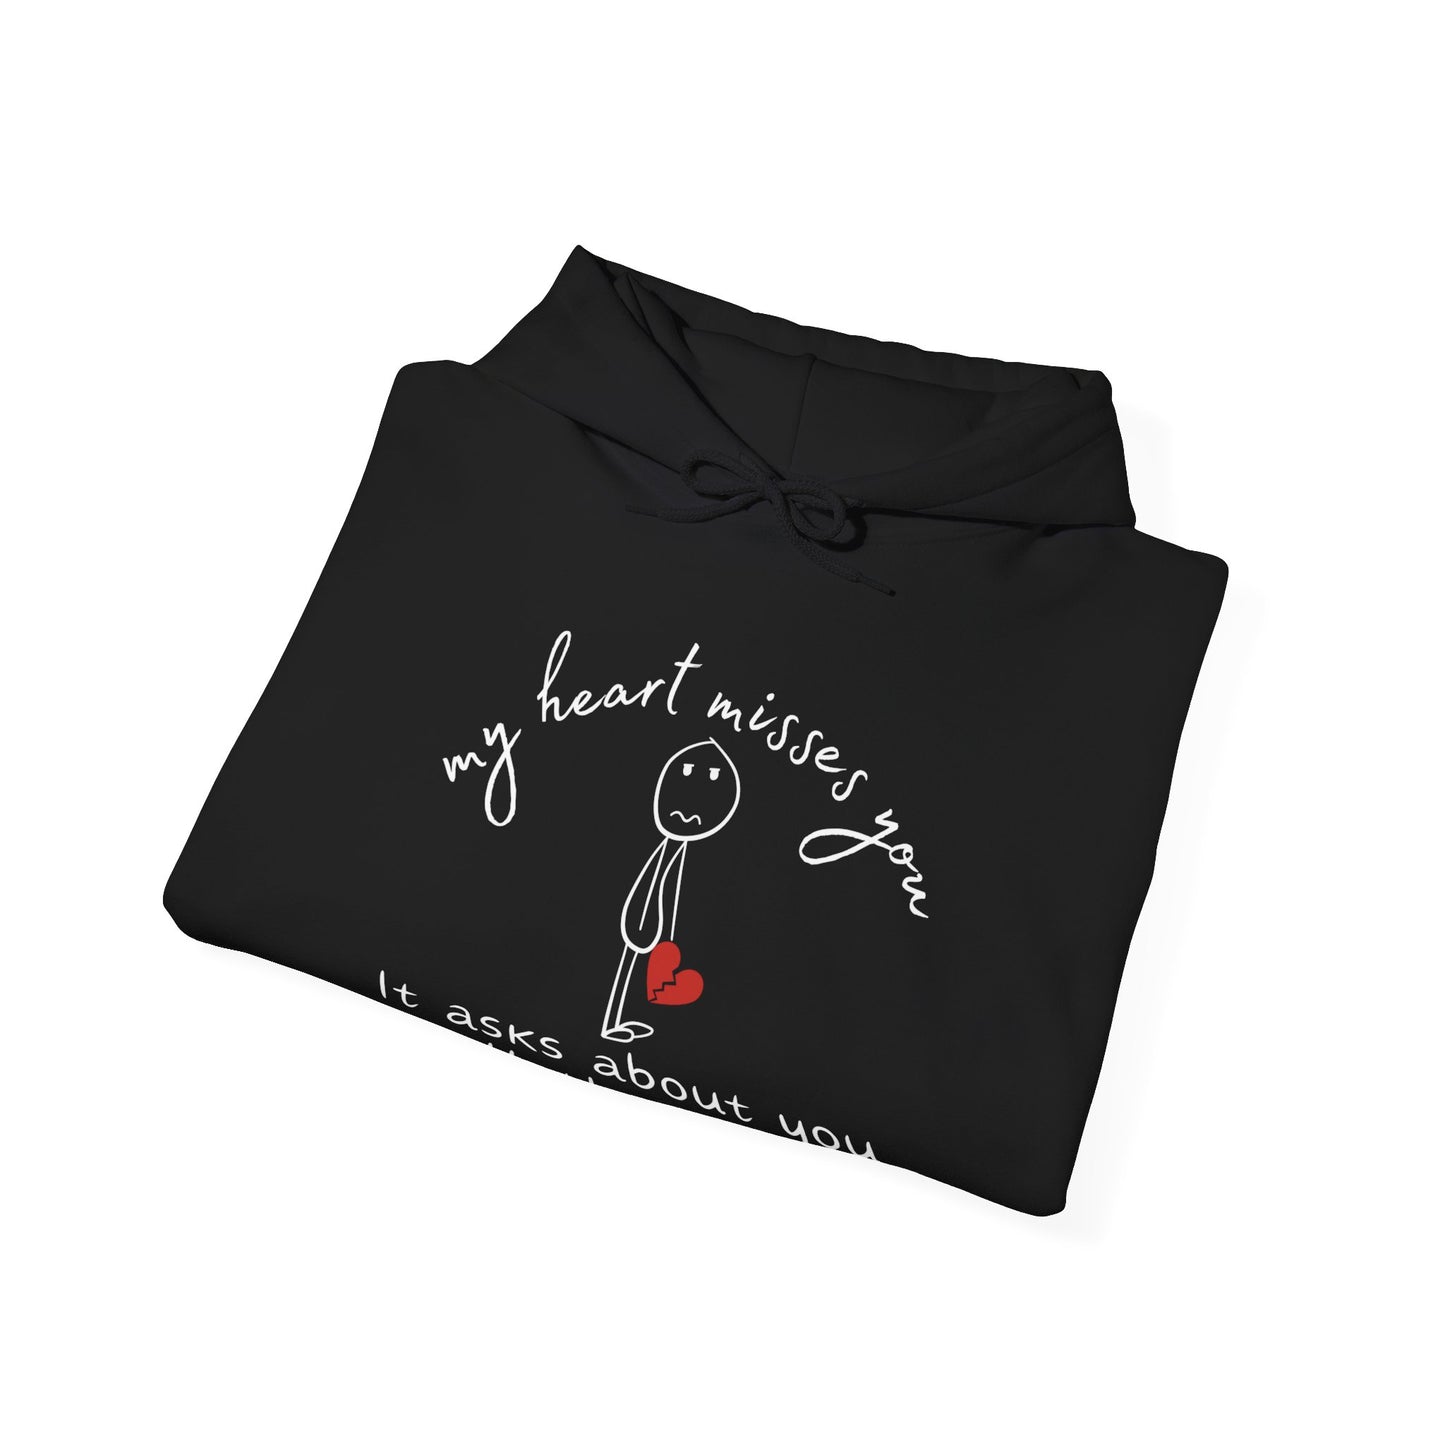 Black Gildan 18500 hoodie sweatshirt. Perfect gift for a grieving friend or anyone dealing with grief and loss. "My heart misses you, it asks about you all the time."